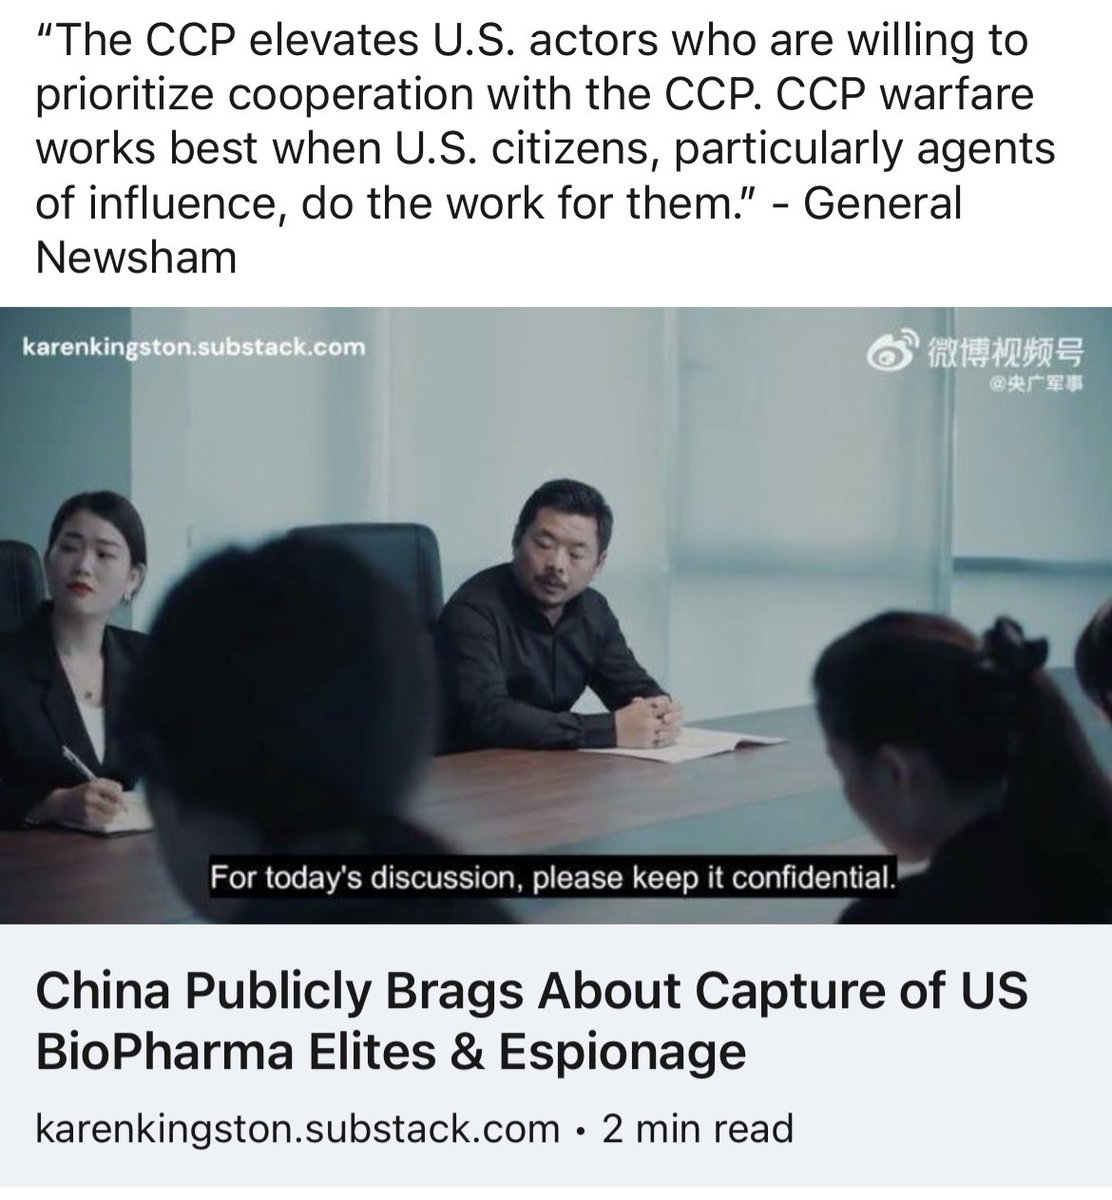 “The CCP elevates U.S. actors who are willing to prioritize cooperation with the CCP. CCP warfare works best when U.S. citizens, particularly agents of influence, do the work for them.” - General Newsham  karenkingston.substack.com/p/china-public…